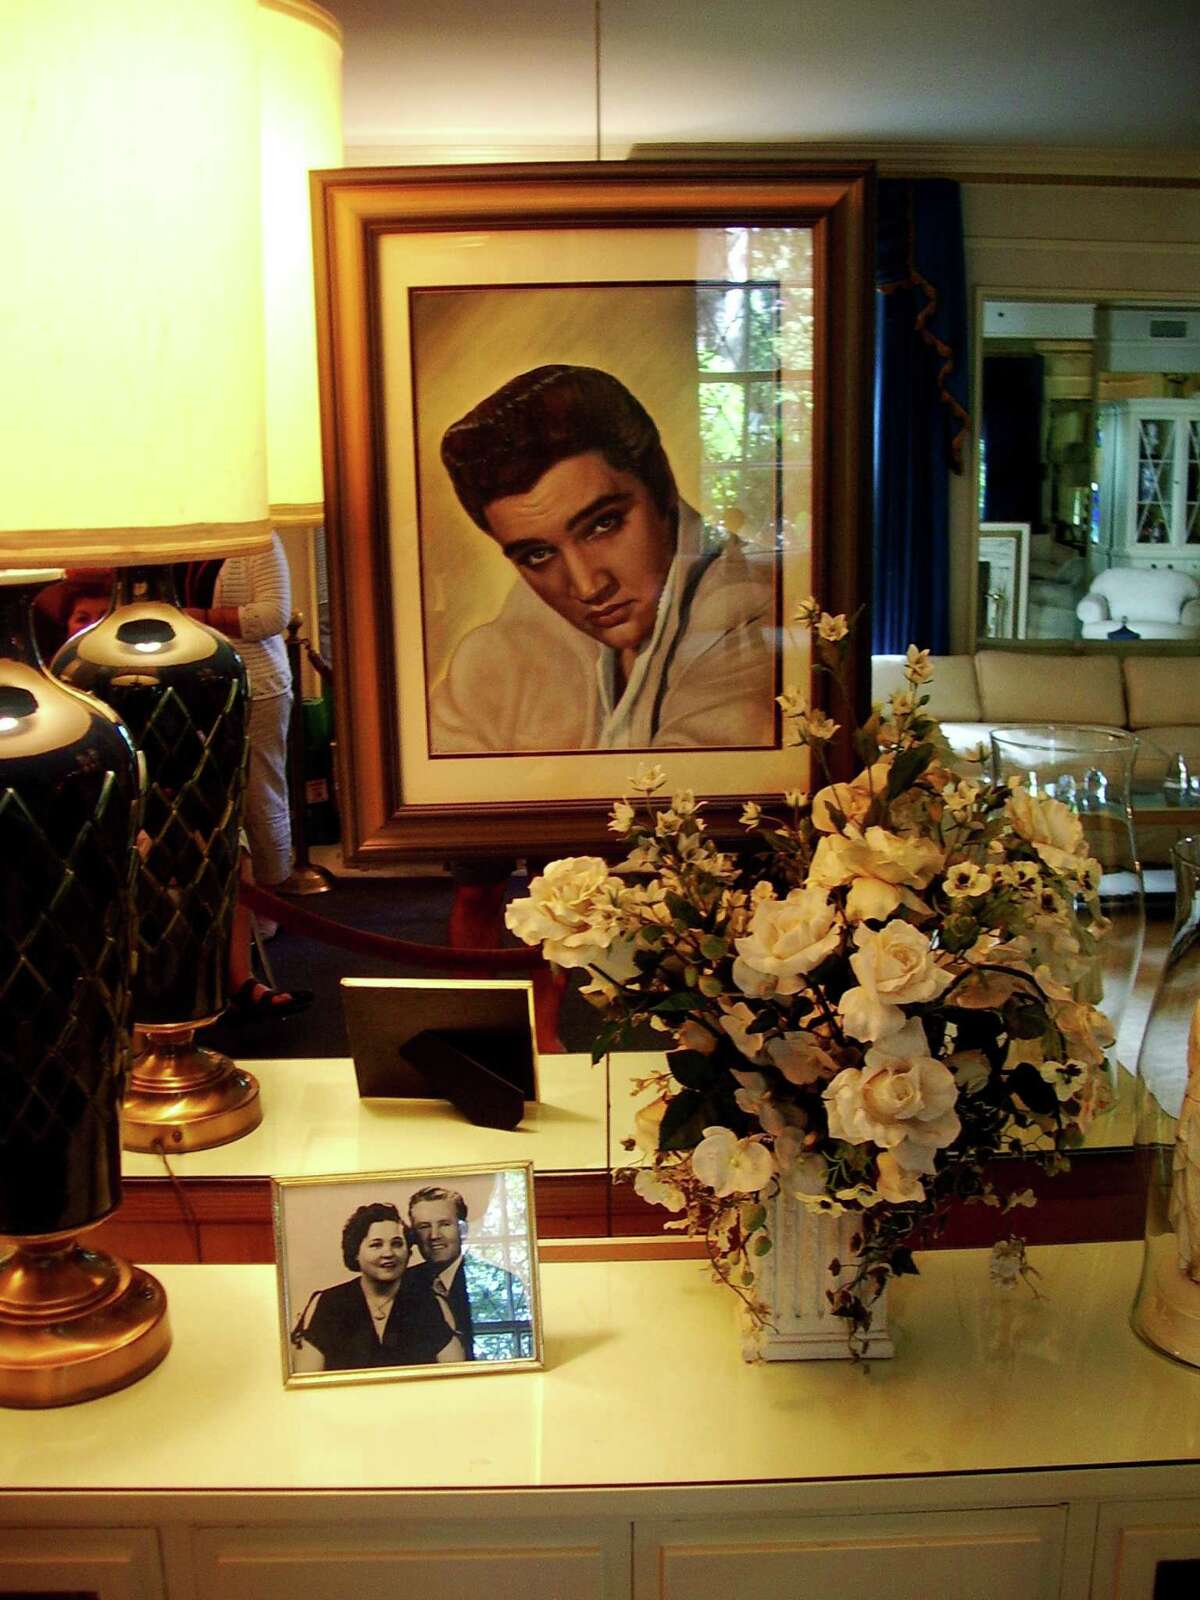 A portrait of Elvis Presley inside Graceland, his home in Memphis, Tenn. In the foreground is a photo of his parents, Gladys and Vernon Presley.